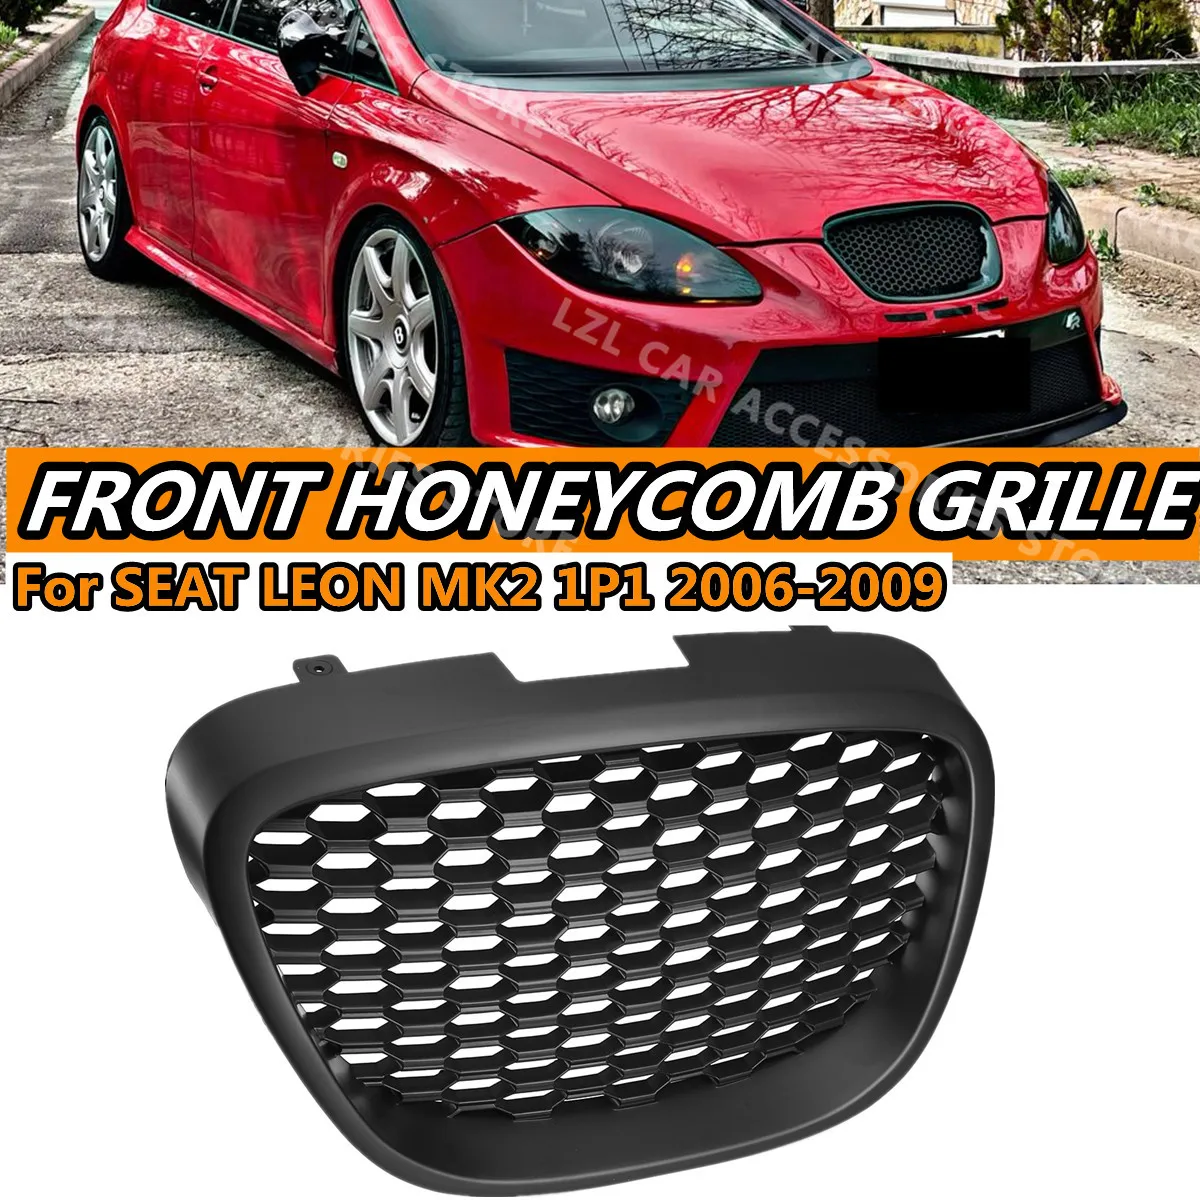 Front Kidney Honeycomb Grille for Seat Leon MK2 1P 2006-2009 Hood Grill Matt Black Replacement Grill Exterior Car accessories